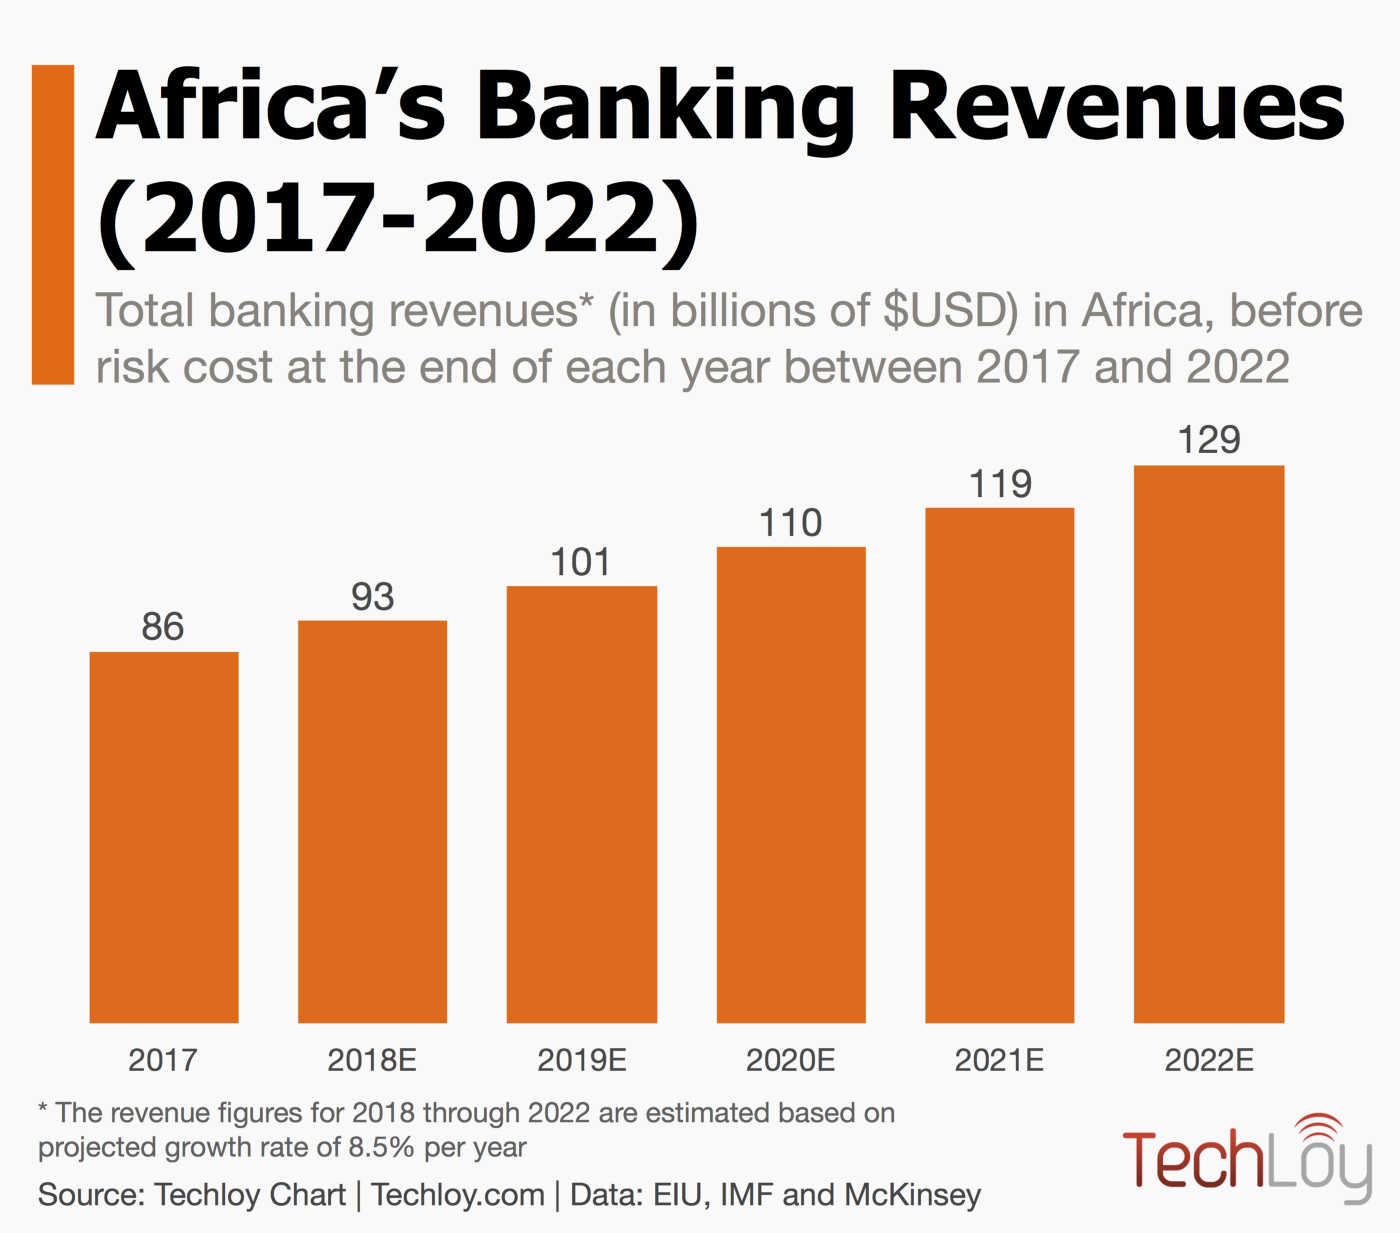 Africa’s banking revenues to reach $129 billion by 2022